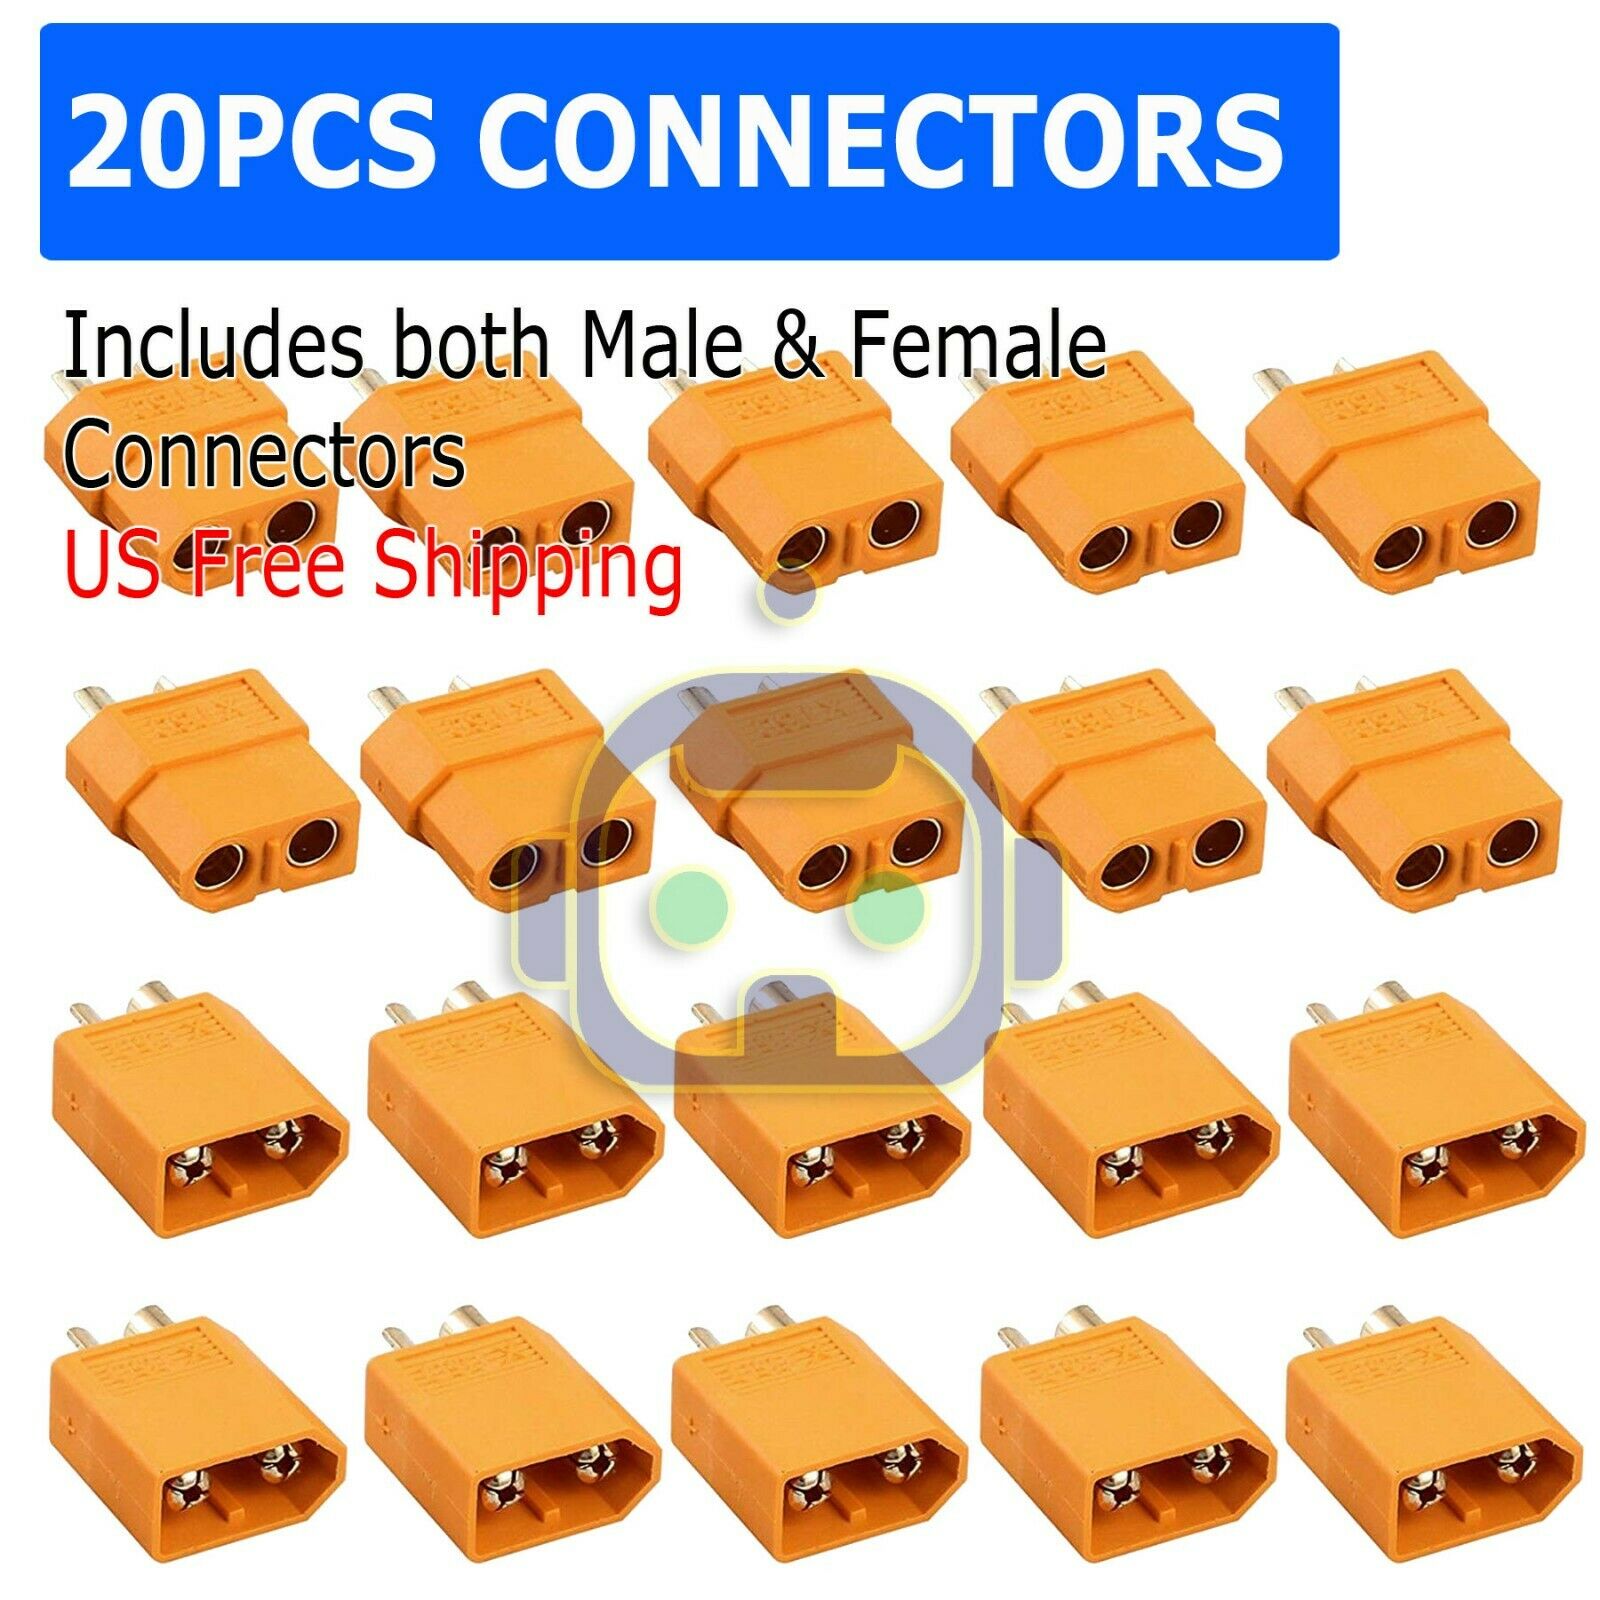 20Pcs XT60 Male Female Bullet Connectors Plugs For RC Battery From US Warehouse